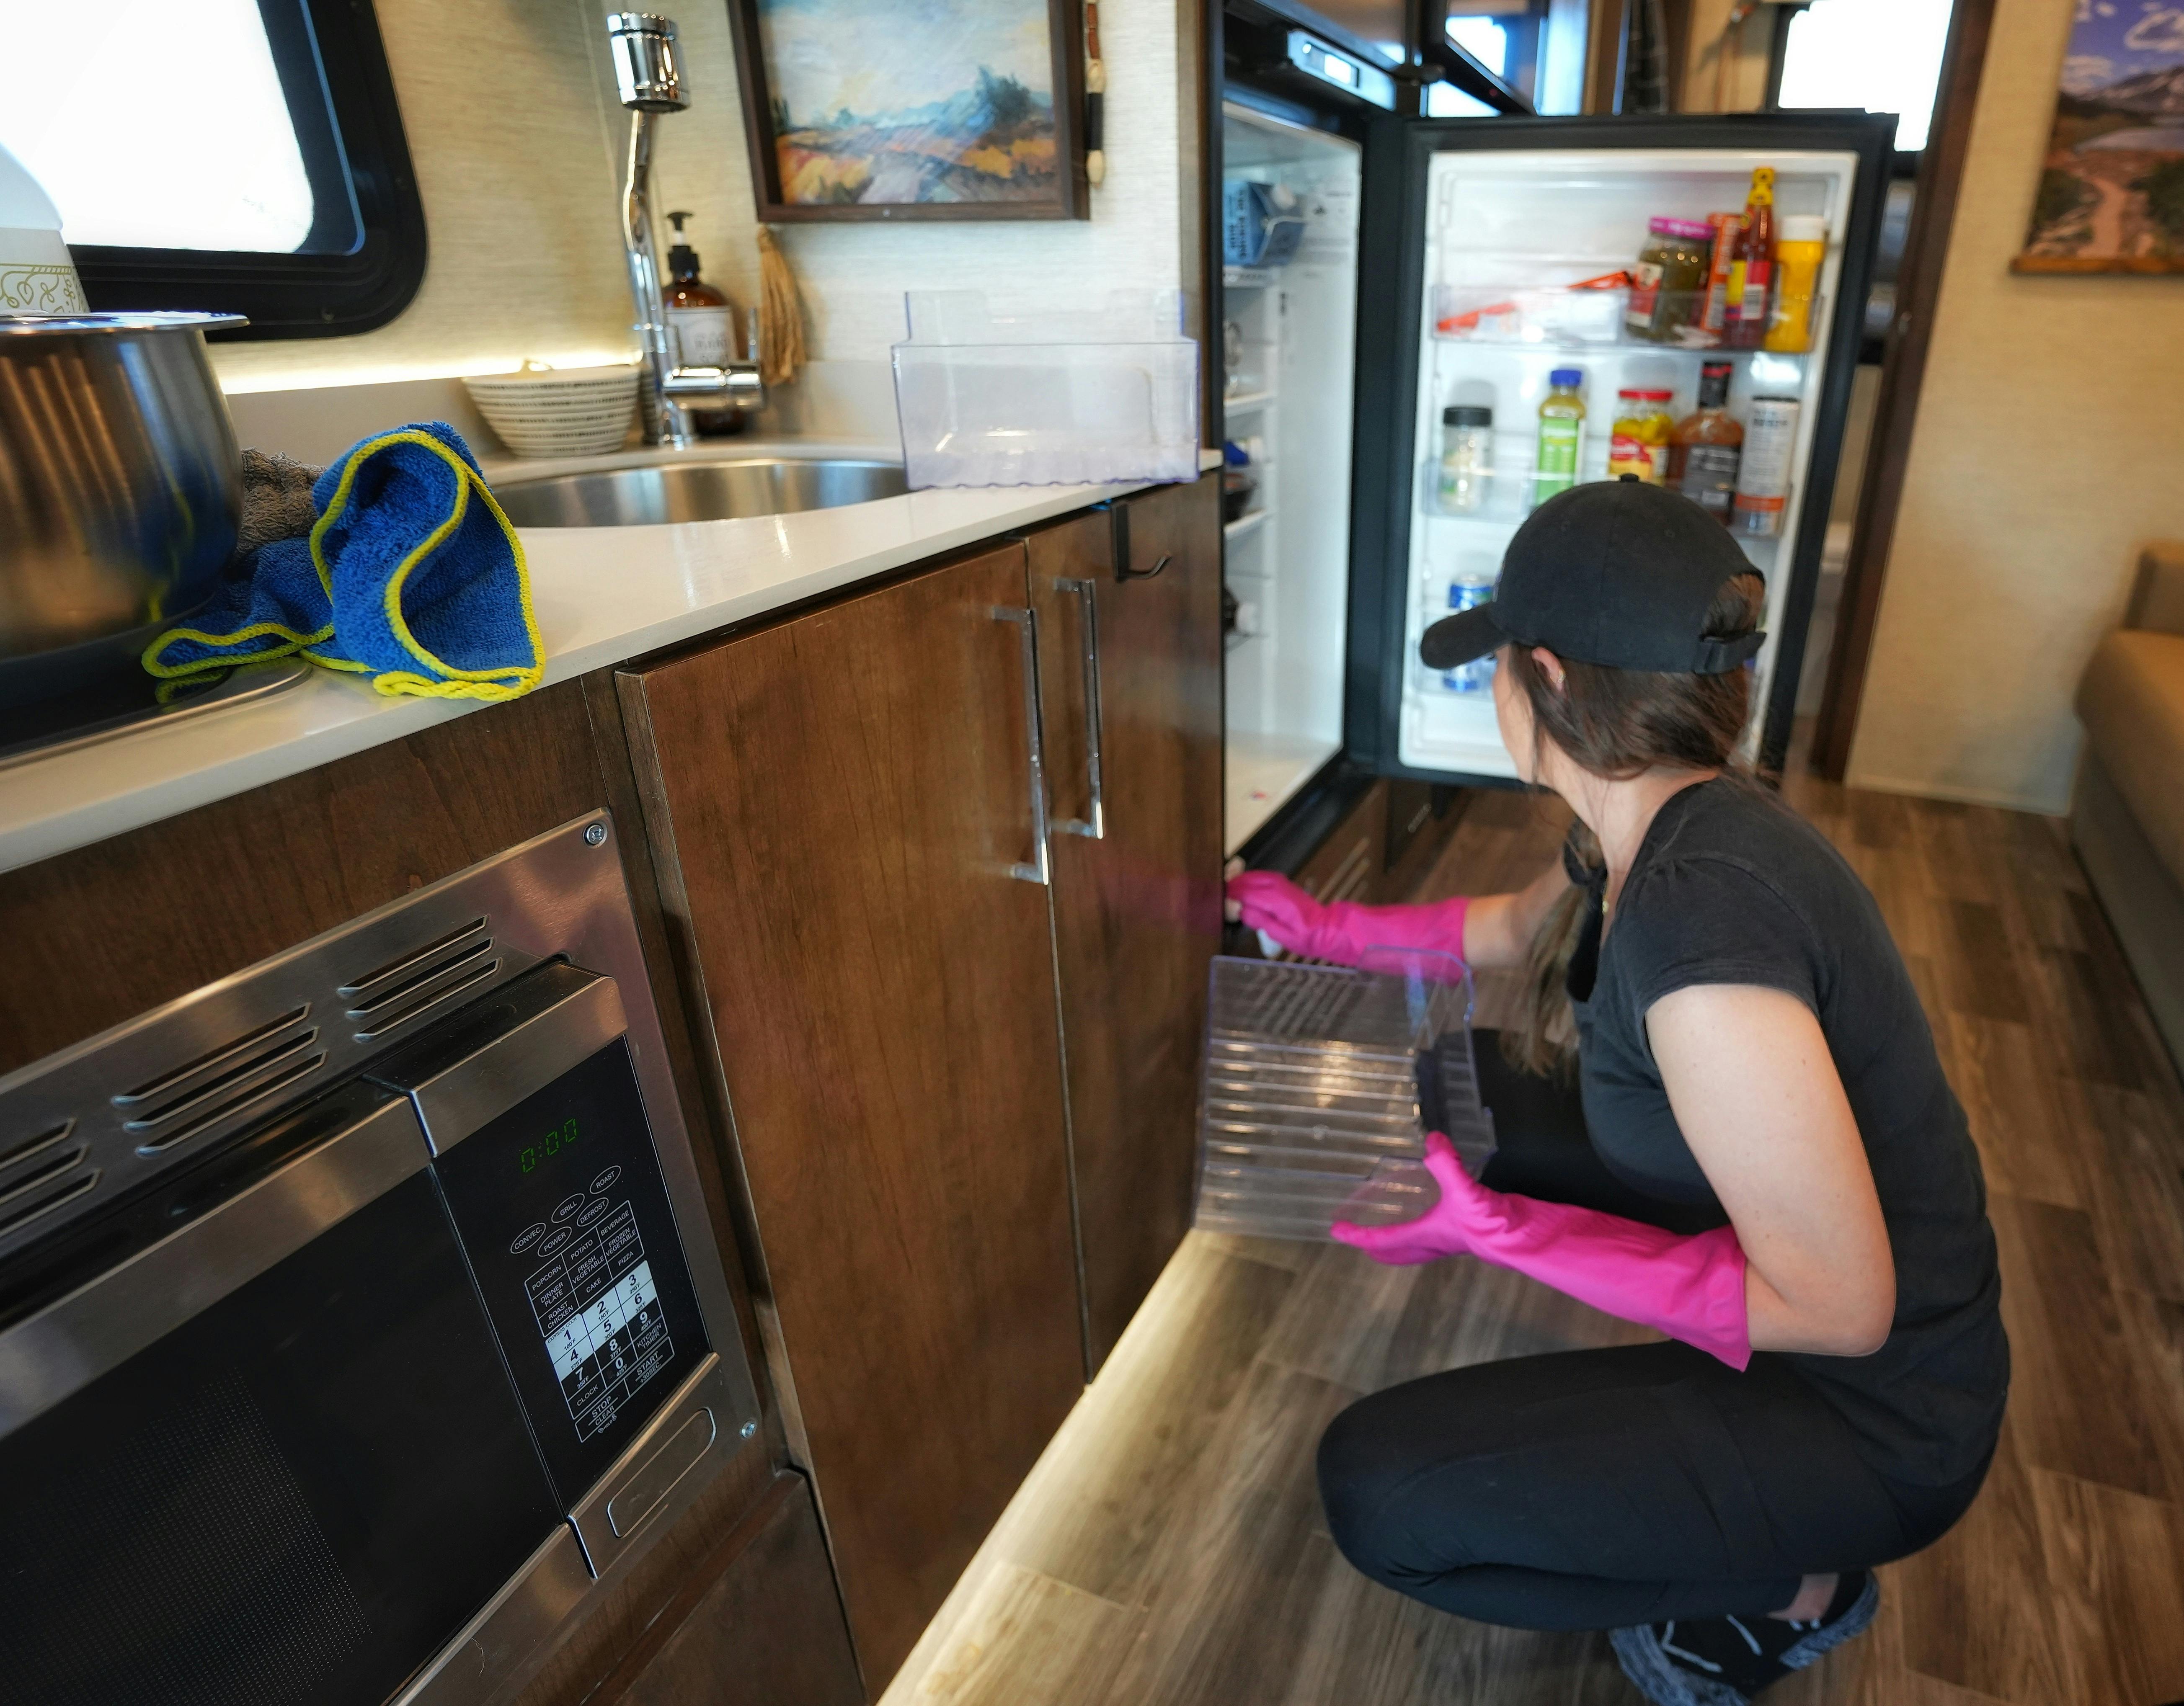 Sarah Bauer cleaning out the fridge in her RV